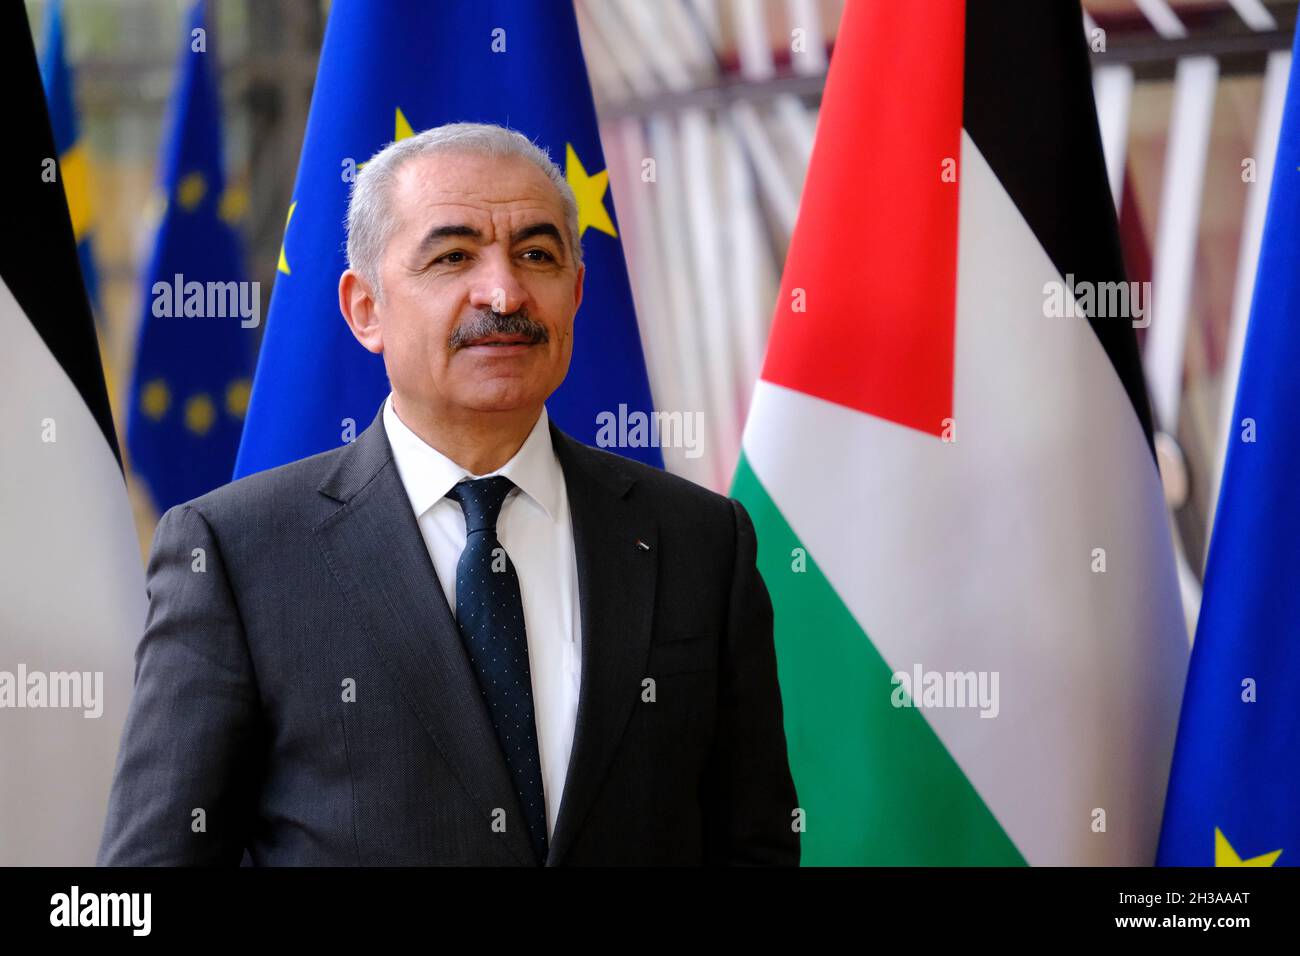 Brussels, Belgium. 27th Oct, 2021. European Council President Charles Michel (R) welcome Palestinian Prime Minister Mohammad Shtayyeh ahead of a meeting in Brussels, Belgium, 27 October 2021. Credit: ALEXANDROS MICHAILIDIS/Alamy Live News Stock Photo